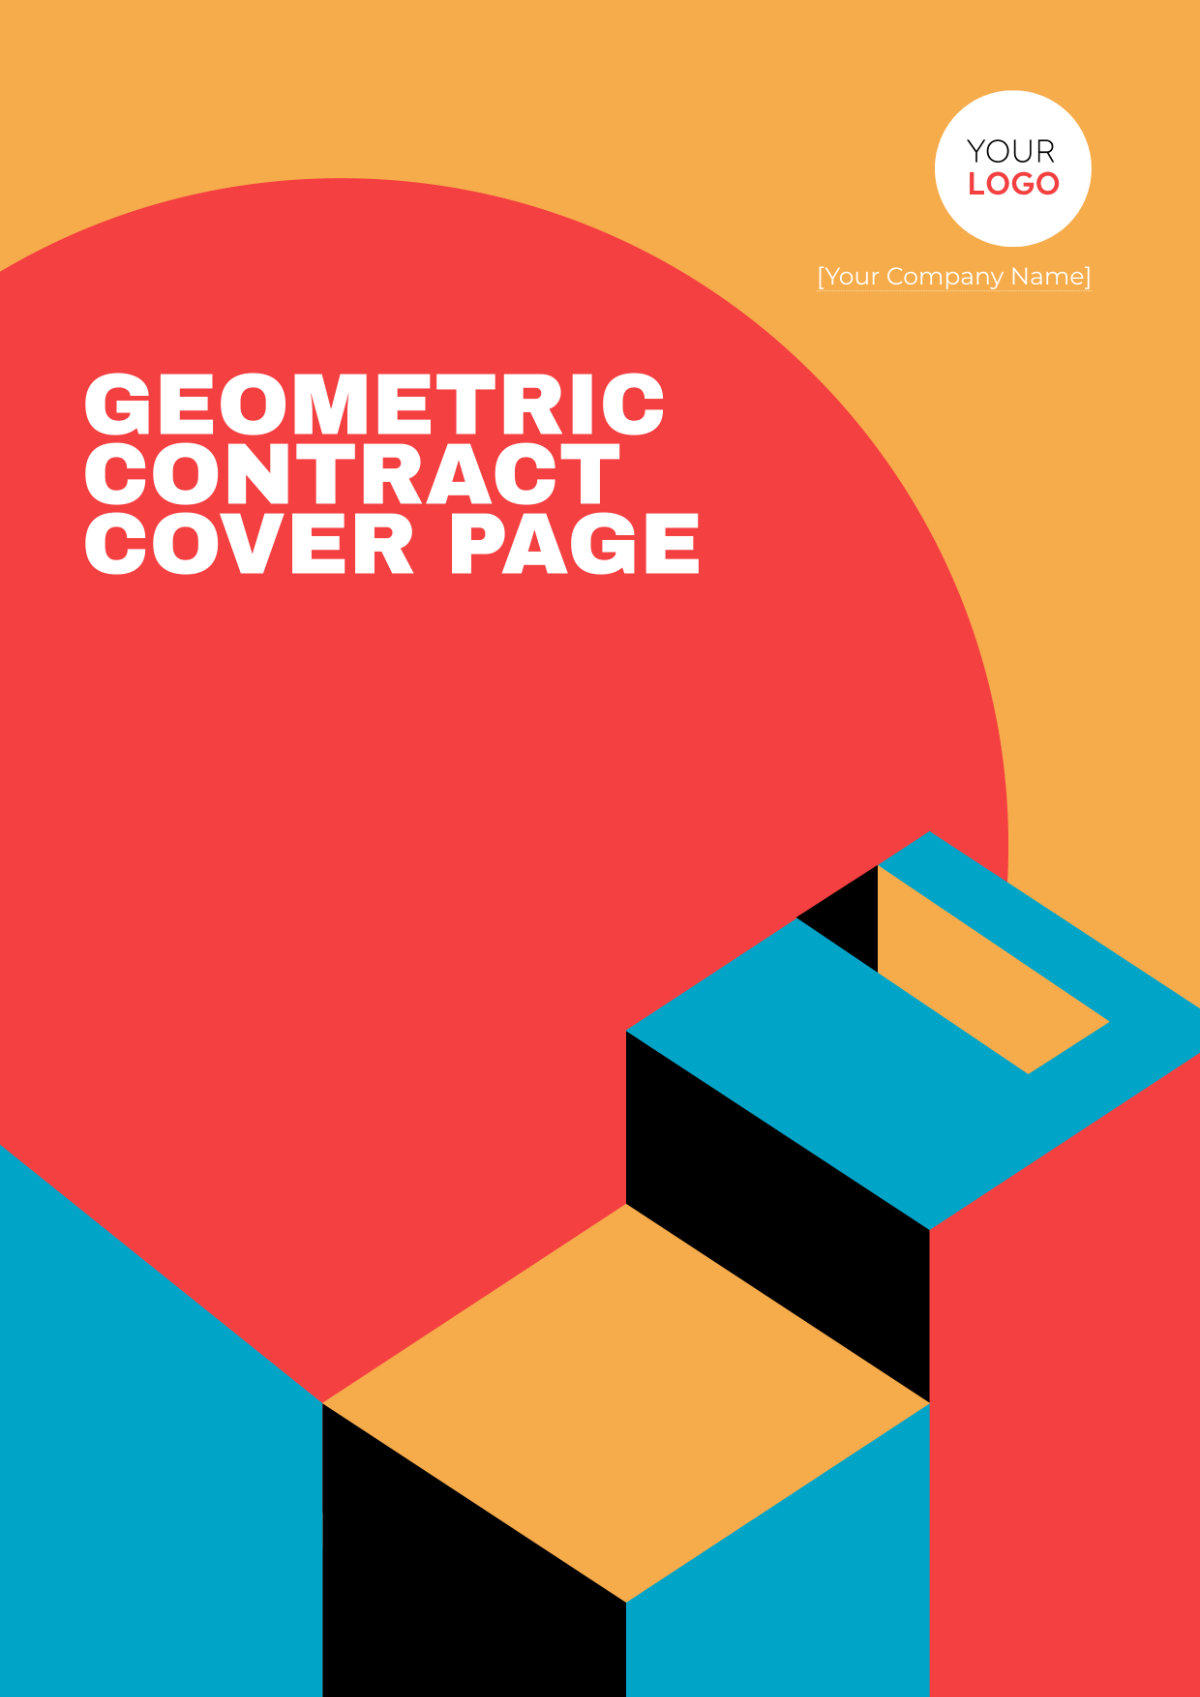 Geometric Contract Cover Page Template